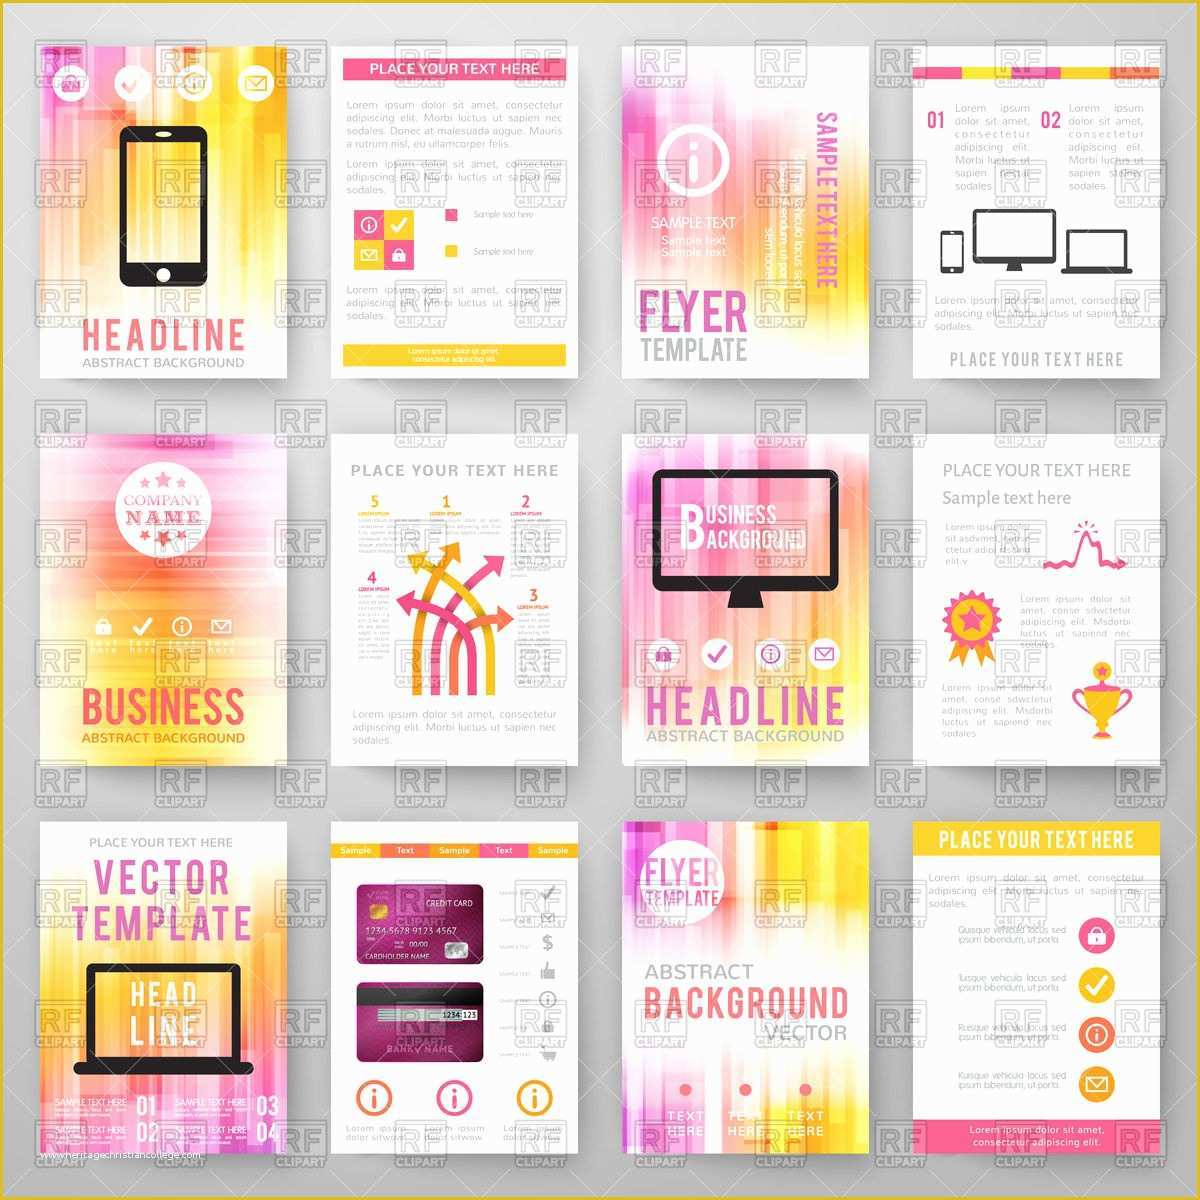 Royalty Free Flyer Templates Of Set Of Bright Templates for Flyer Brochure Royalty Free